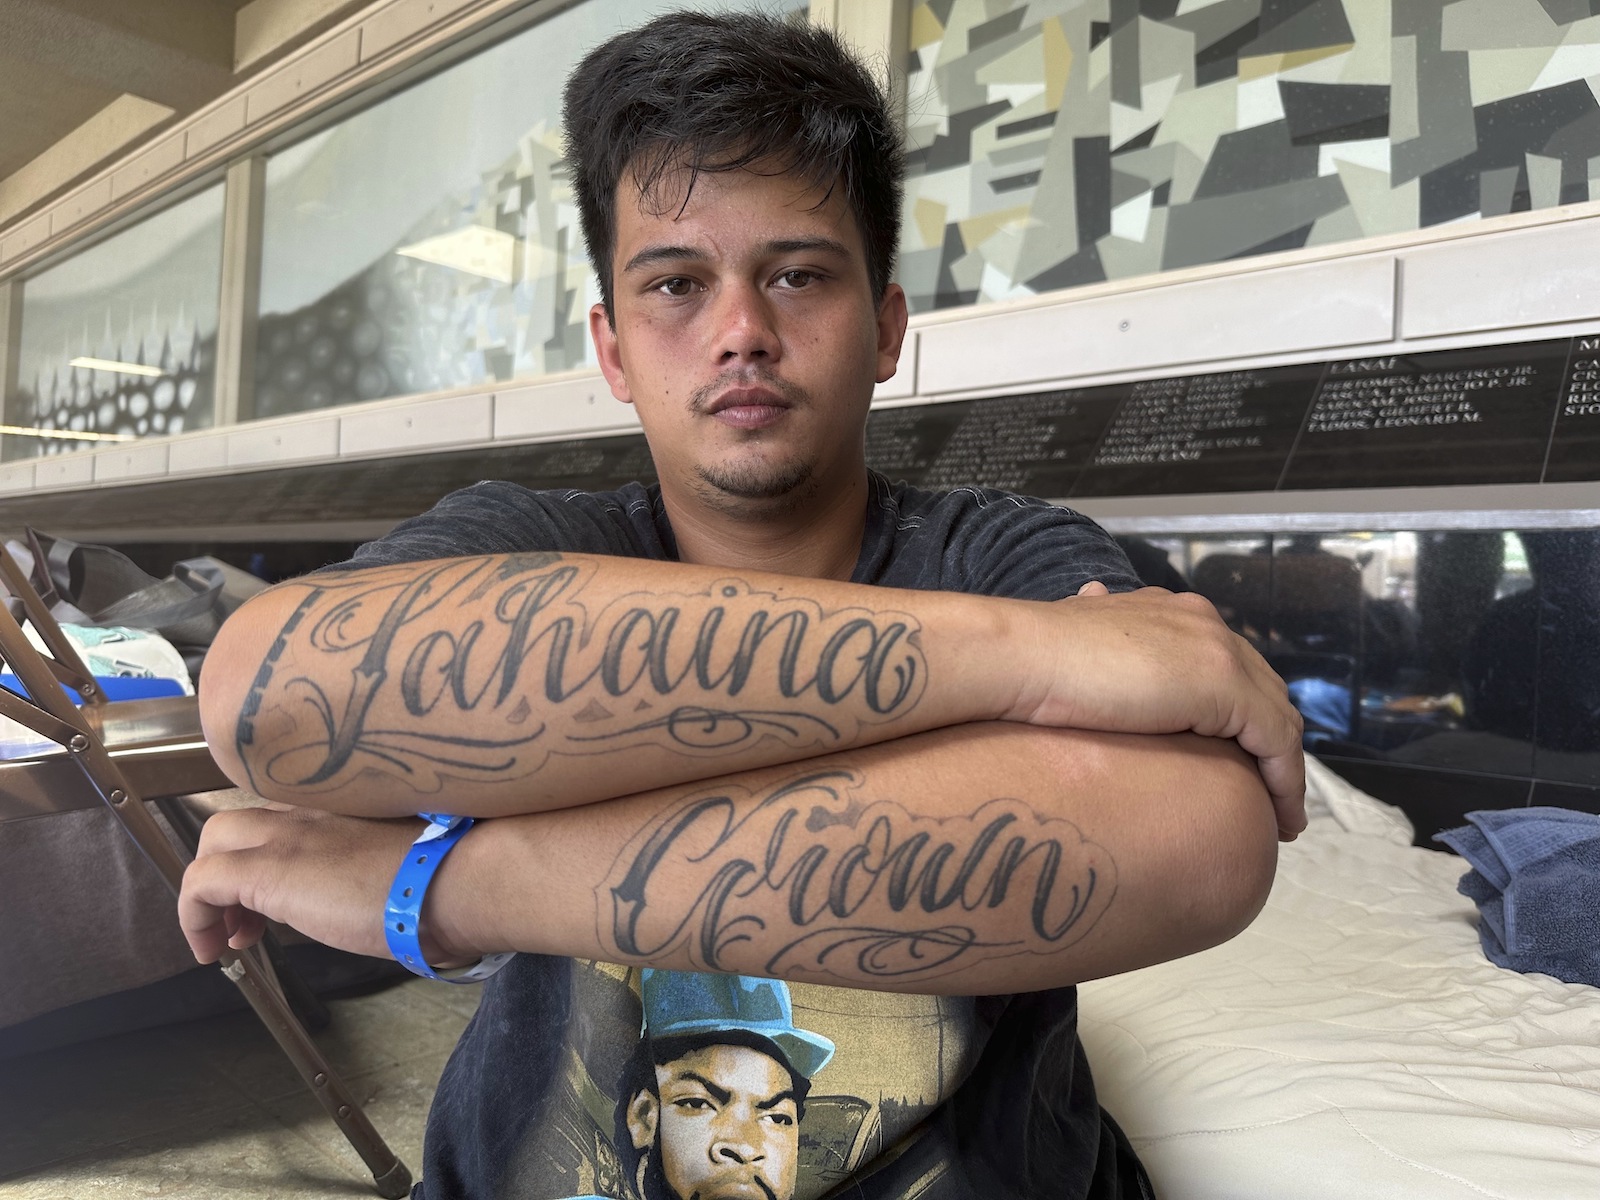 a young man shows his forearms which are tatooed with "Lahaina Grown"